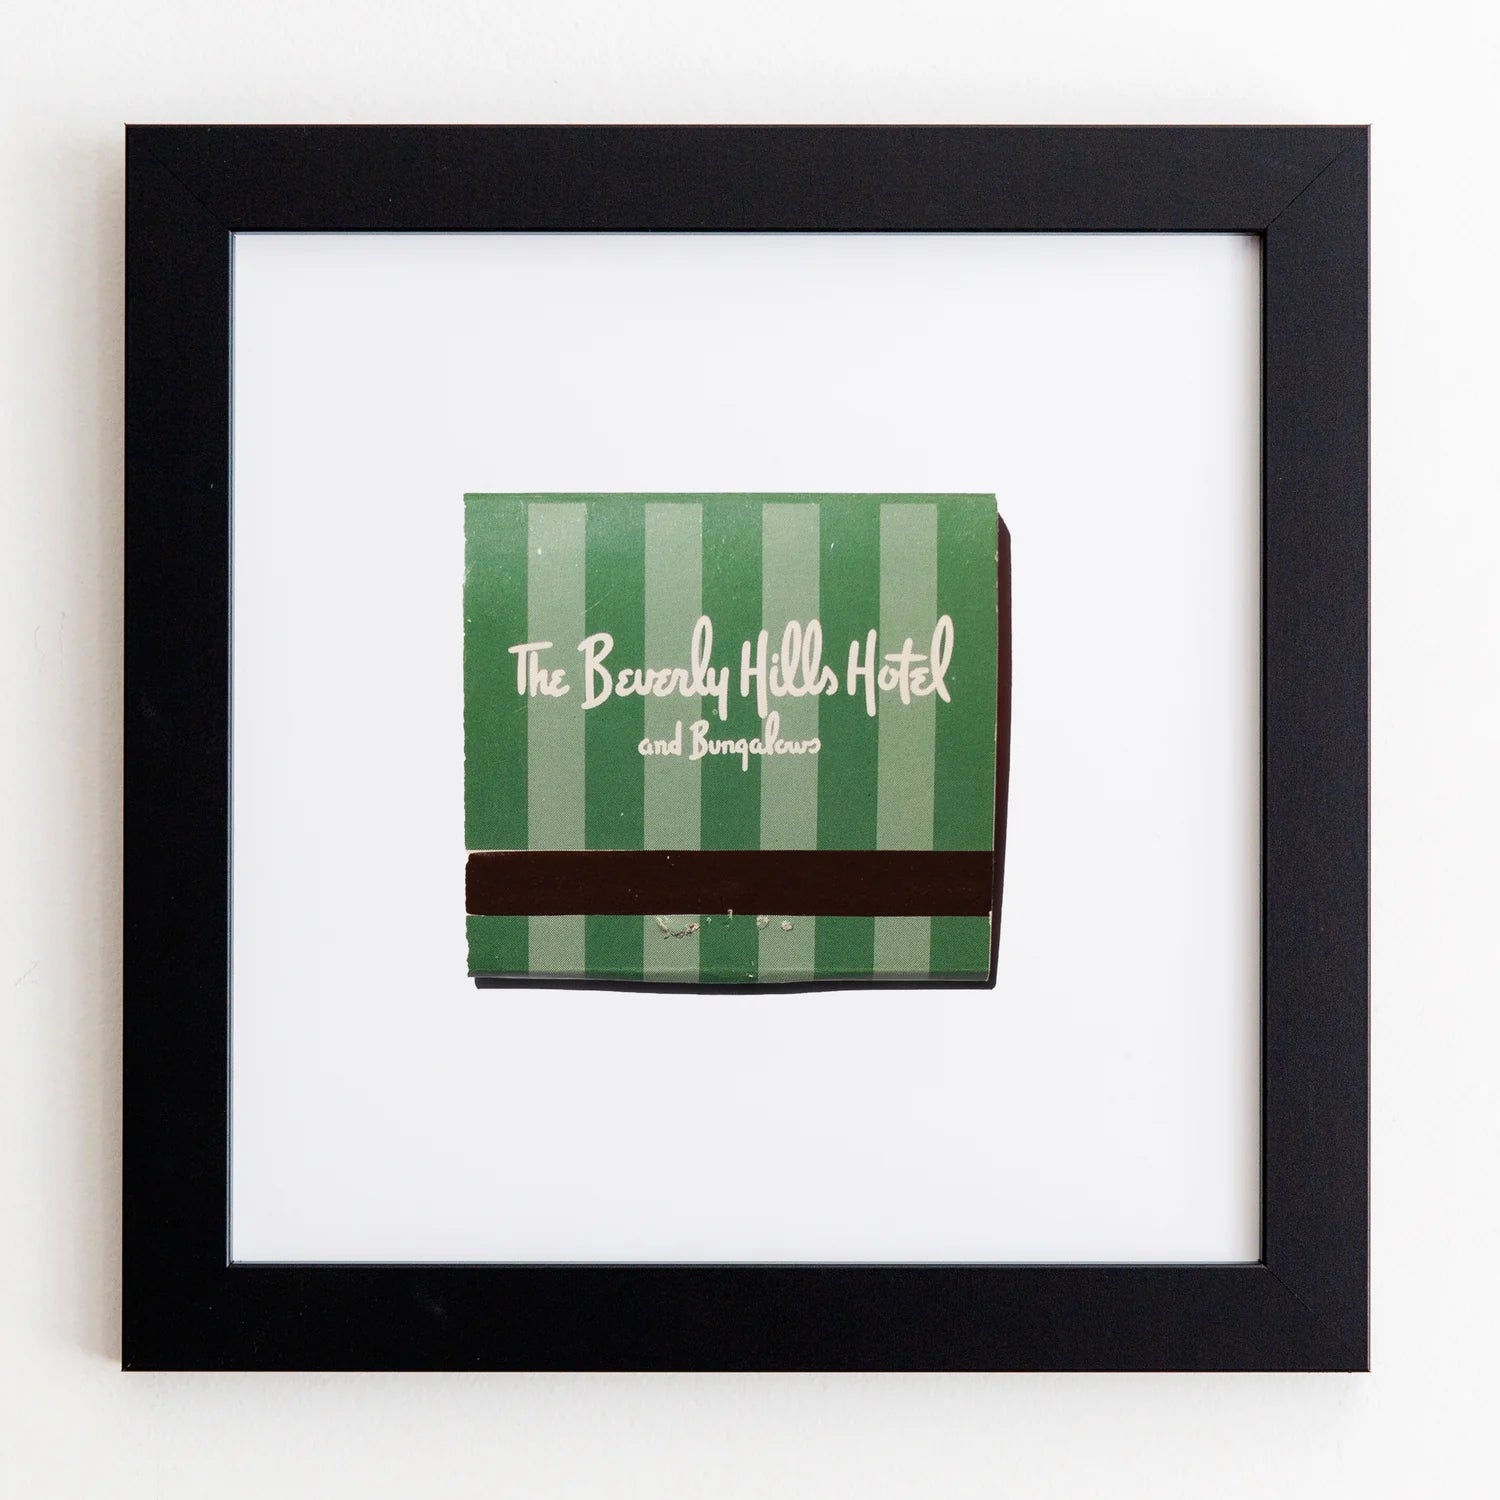 A framed matchbook from Match South, featuring a green and white striped cover with brown accents, mounted on a white background in an Art Square Black Frame.